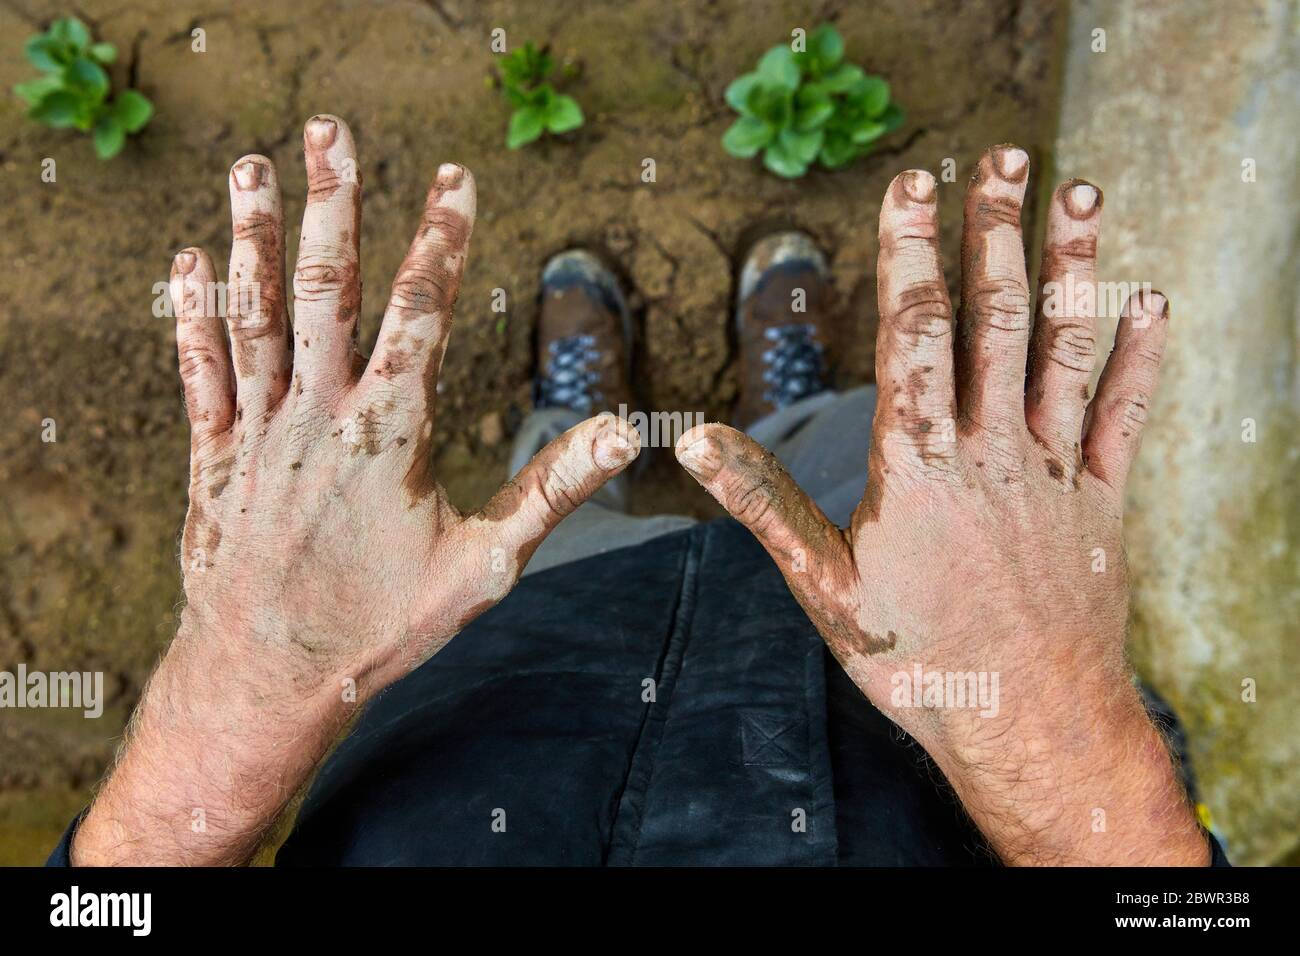 Dirty hands of farmer, Agricultural field, Calahorra, La Rioja, Spain, Europe Stock Photo